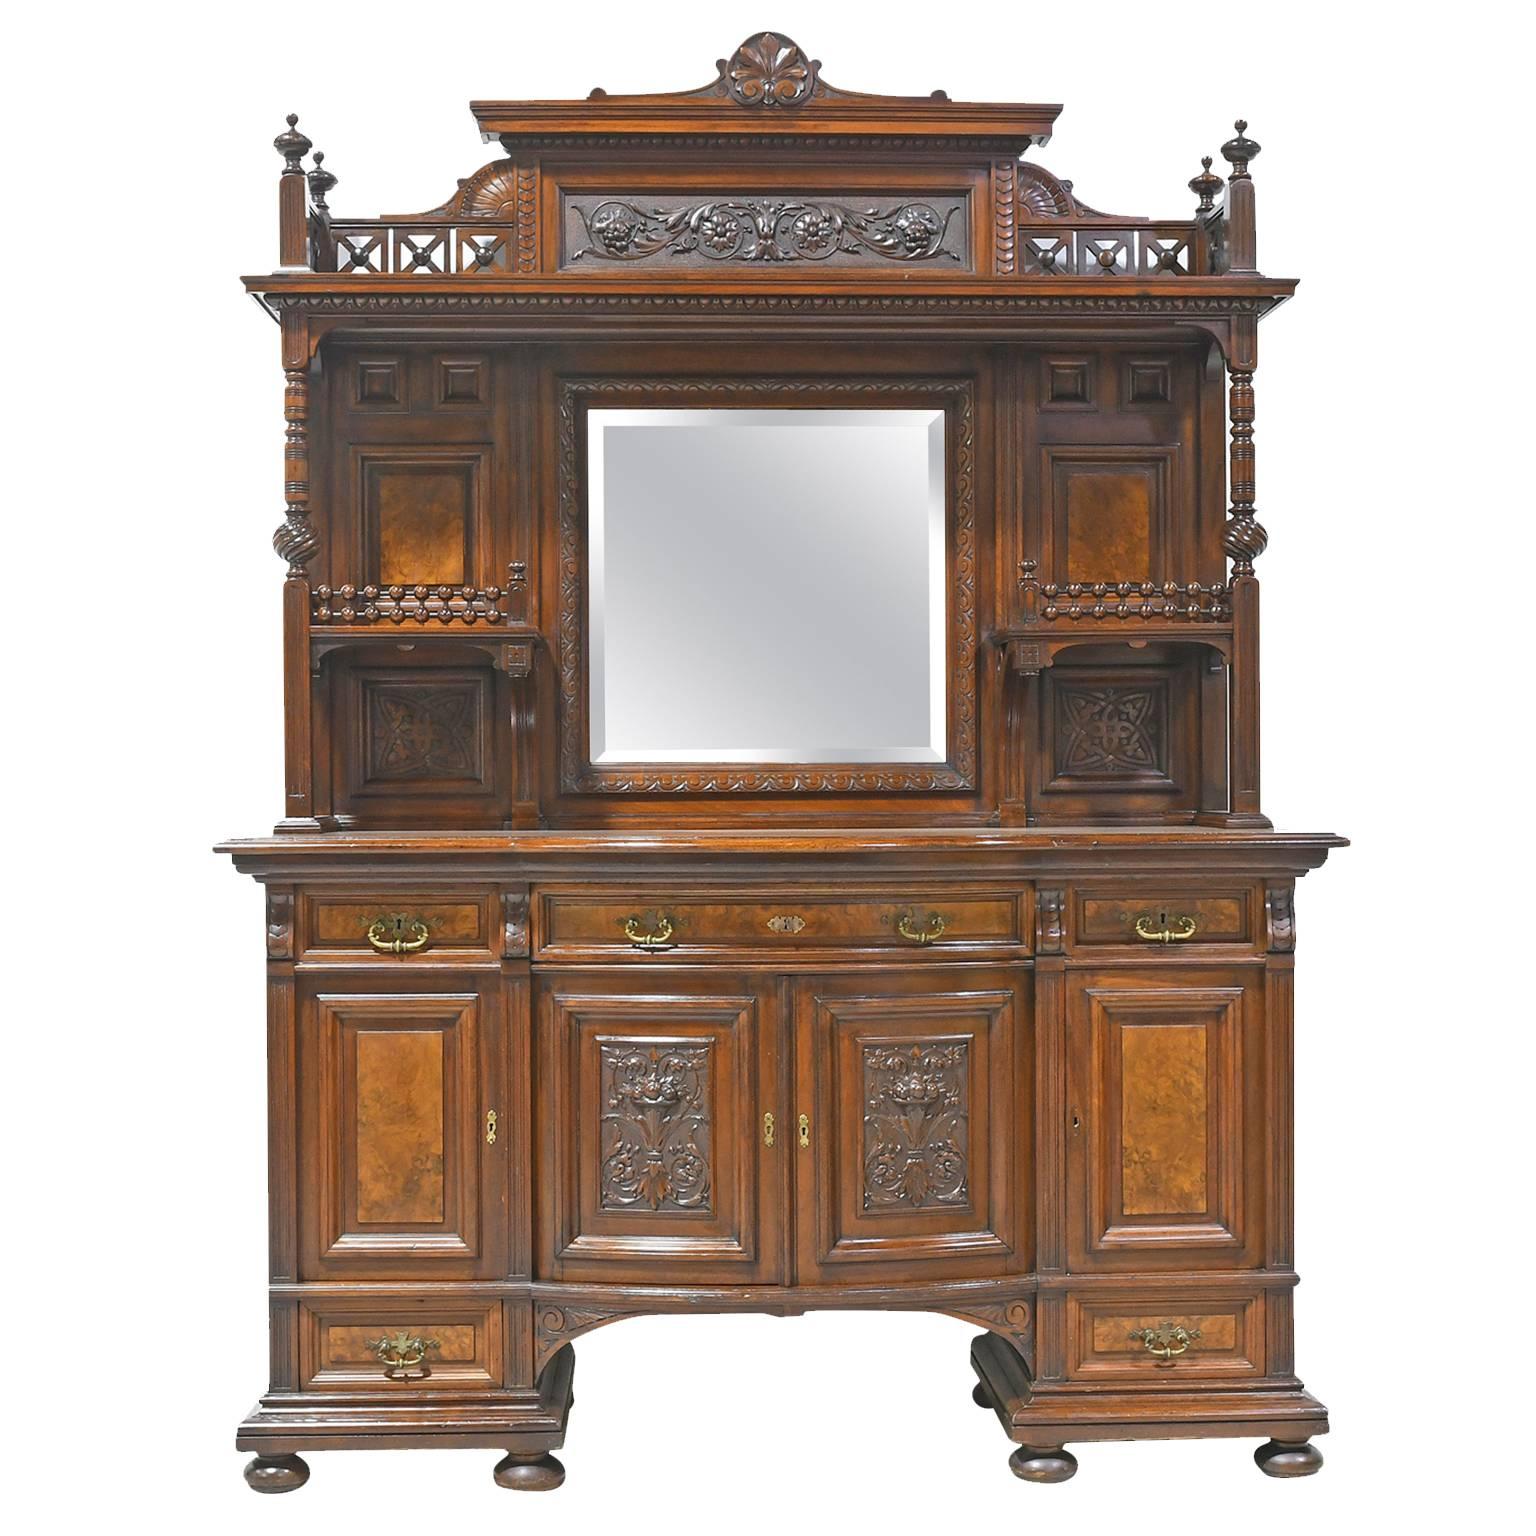 New York City Belle Époque Bar Cabinet from the American Golden Age, circa 1890 For Sale